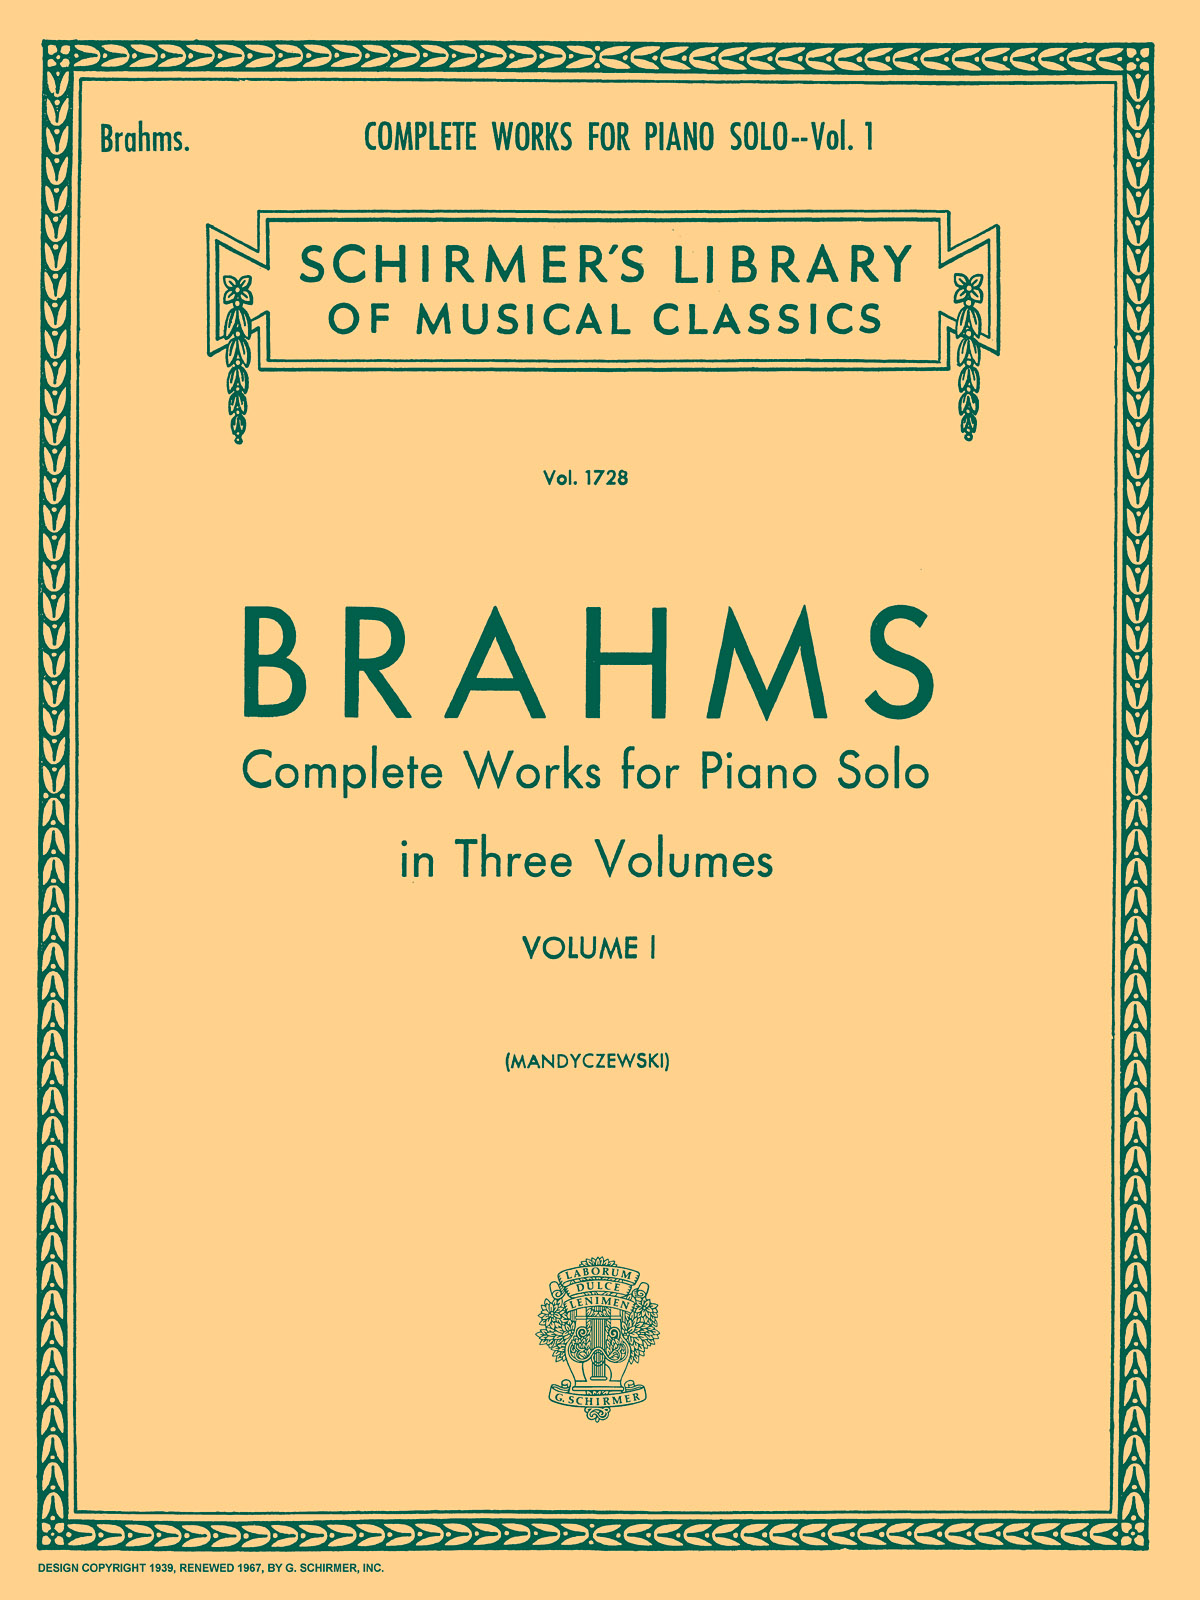 Brahms: Complete Works for Piano Solo - Volume 1